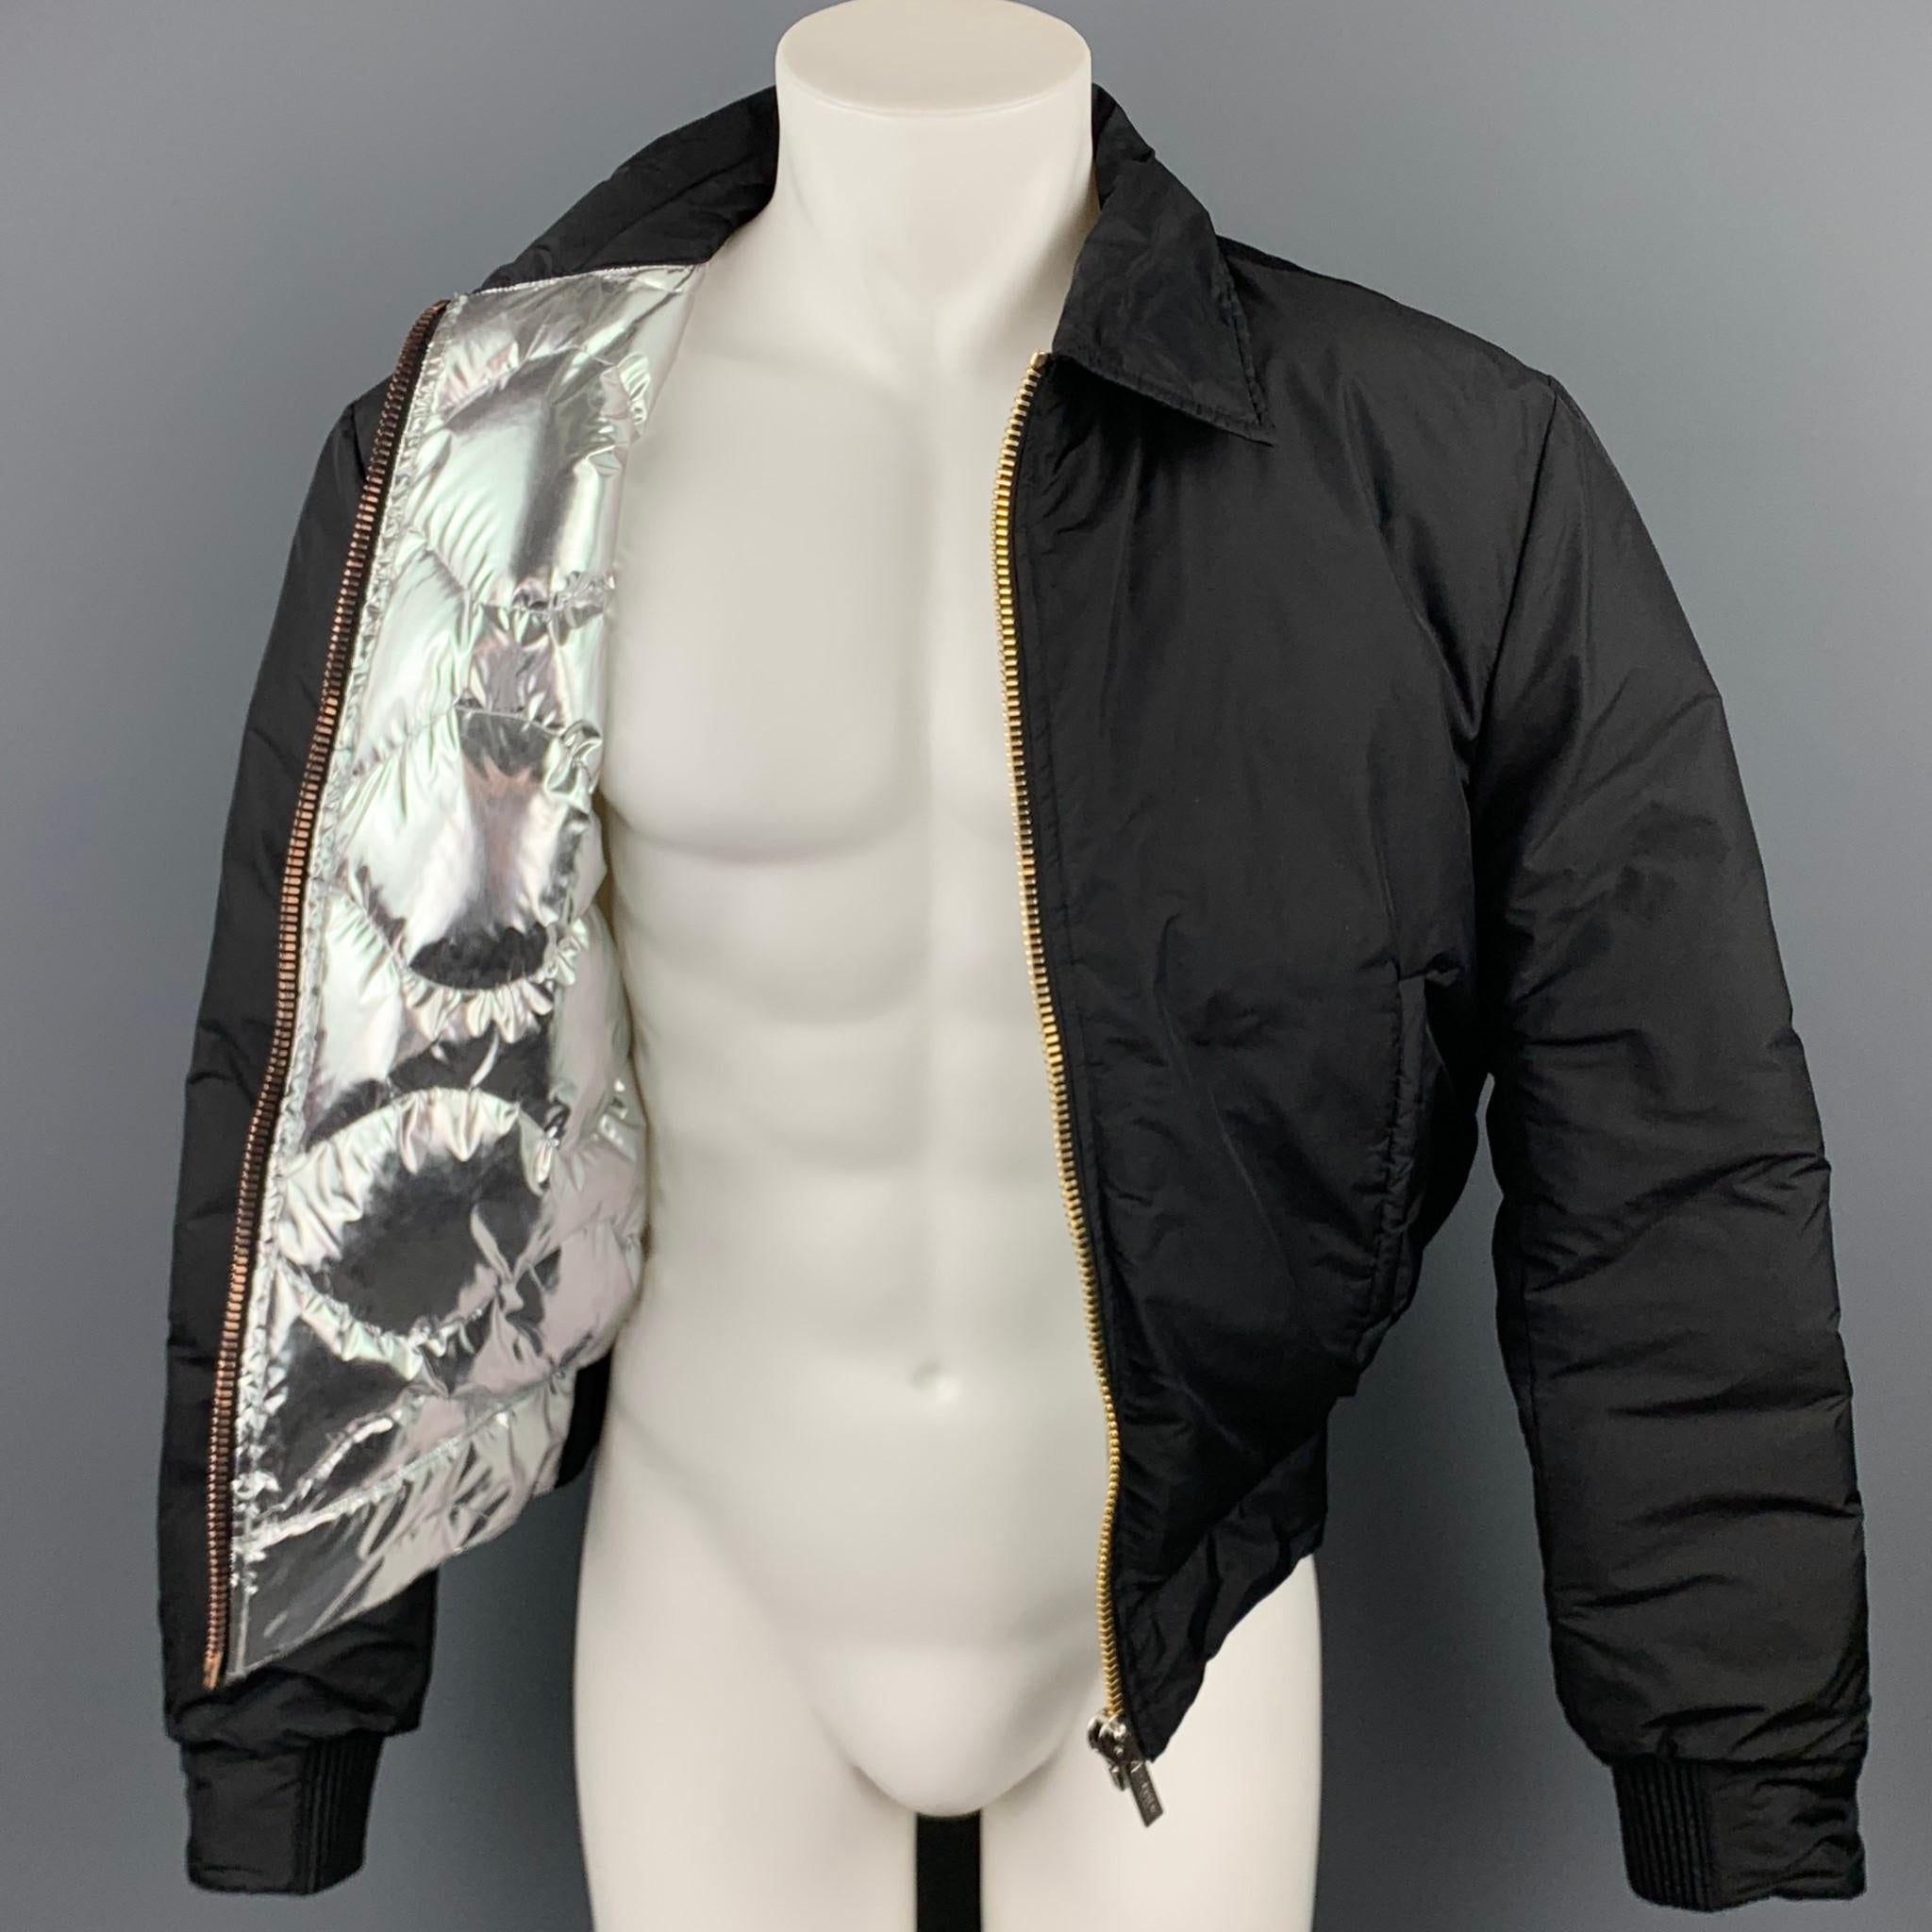 CALVIN KLEIN COLLECTION jacket comes in a black polyamide with a silver metallic quilted liner featuring a spread collar and a zip up closure. Minor discoloration throughout. Made in Italy.

Good Pre-Owned Condition.
Marked: